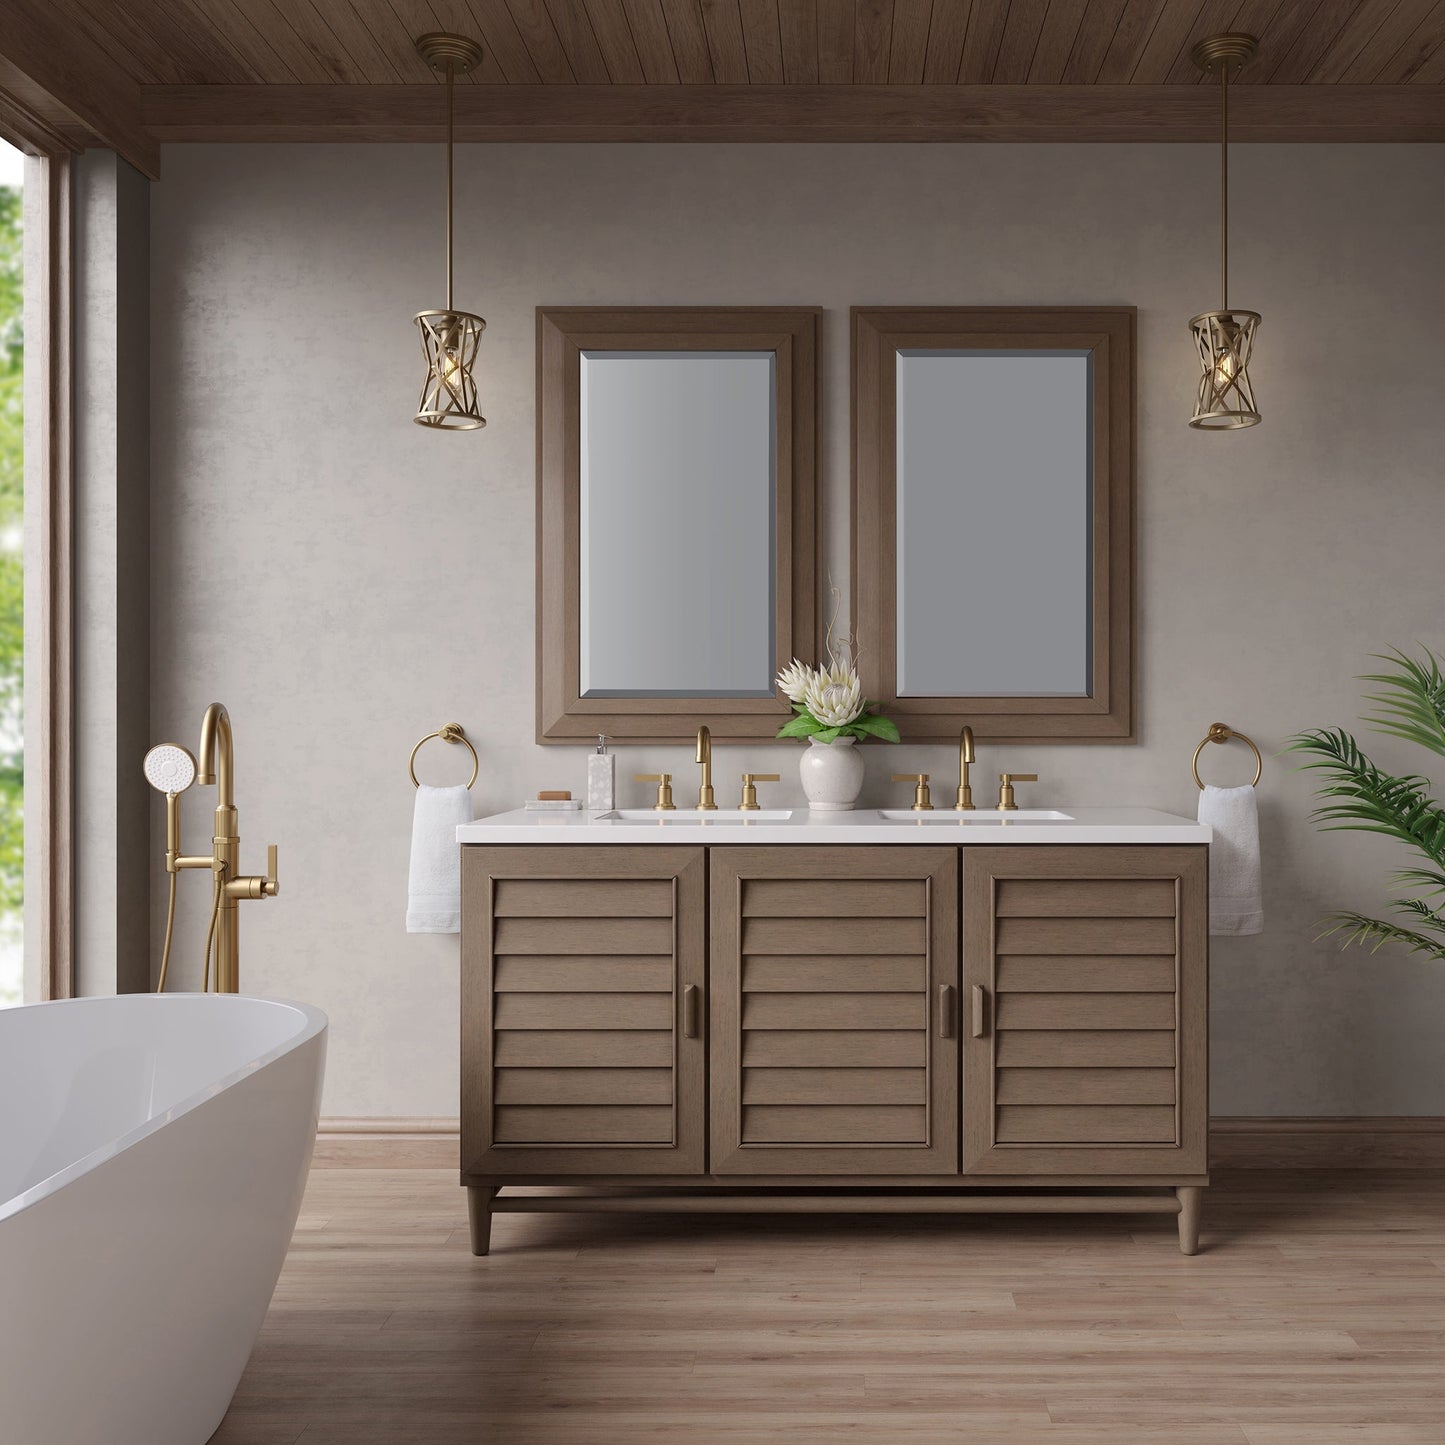 Portland 60" Double Bathroom Vanity in Whitewashed Walnut Double bathroom Vanity James Martin Vanities Select Your Top 